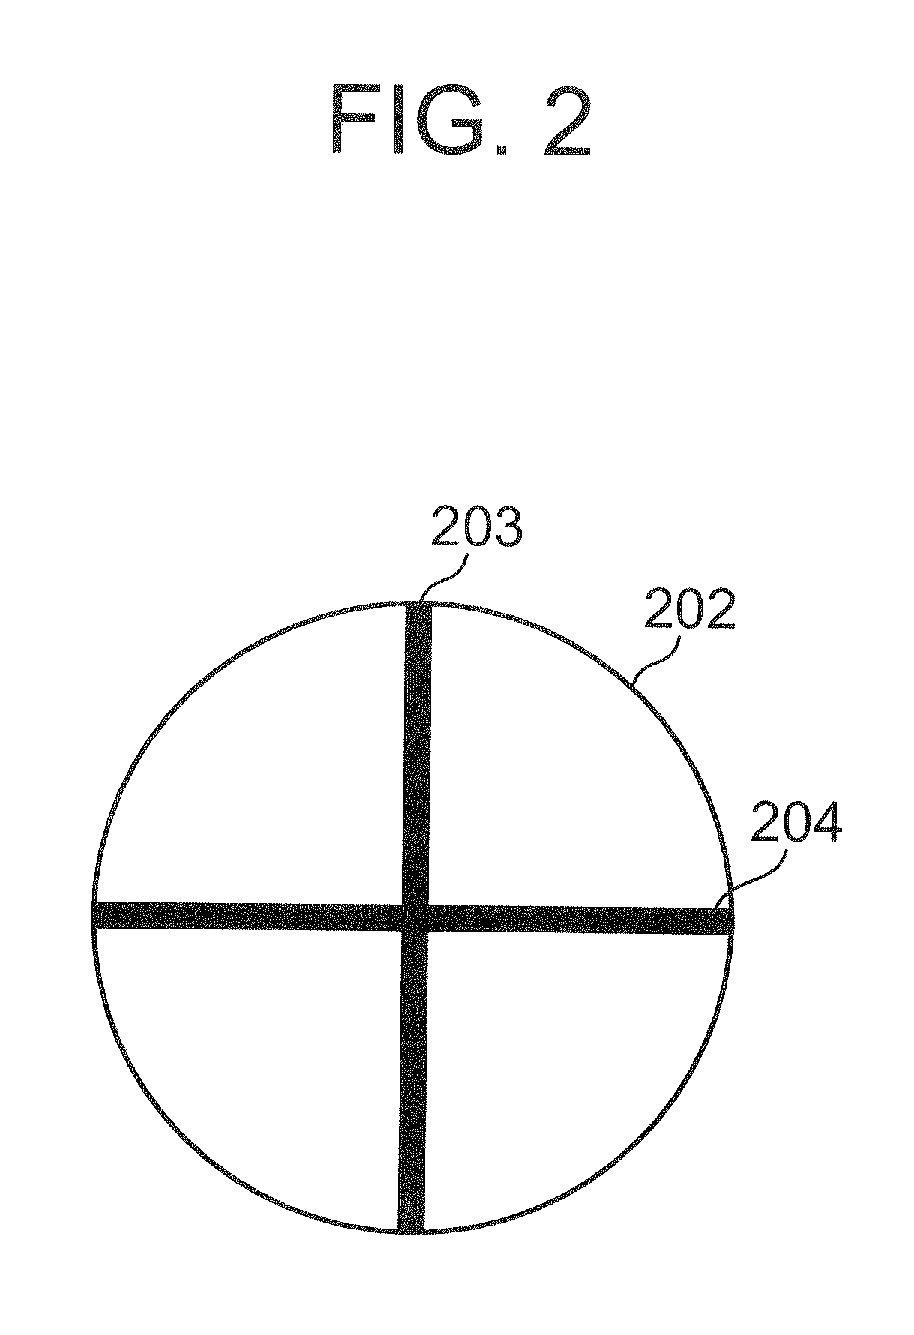 Imaging device and image analysis method